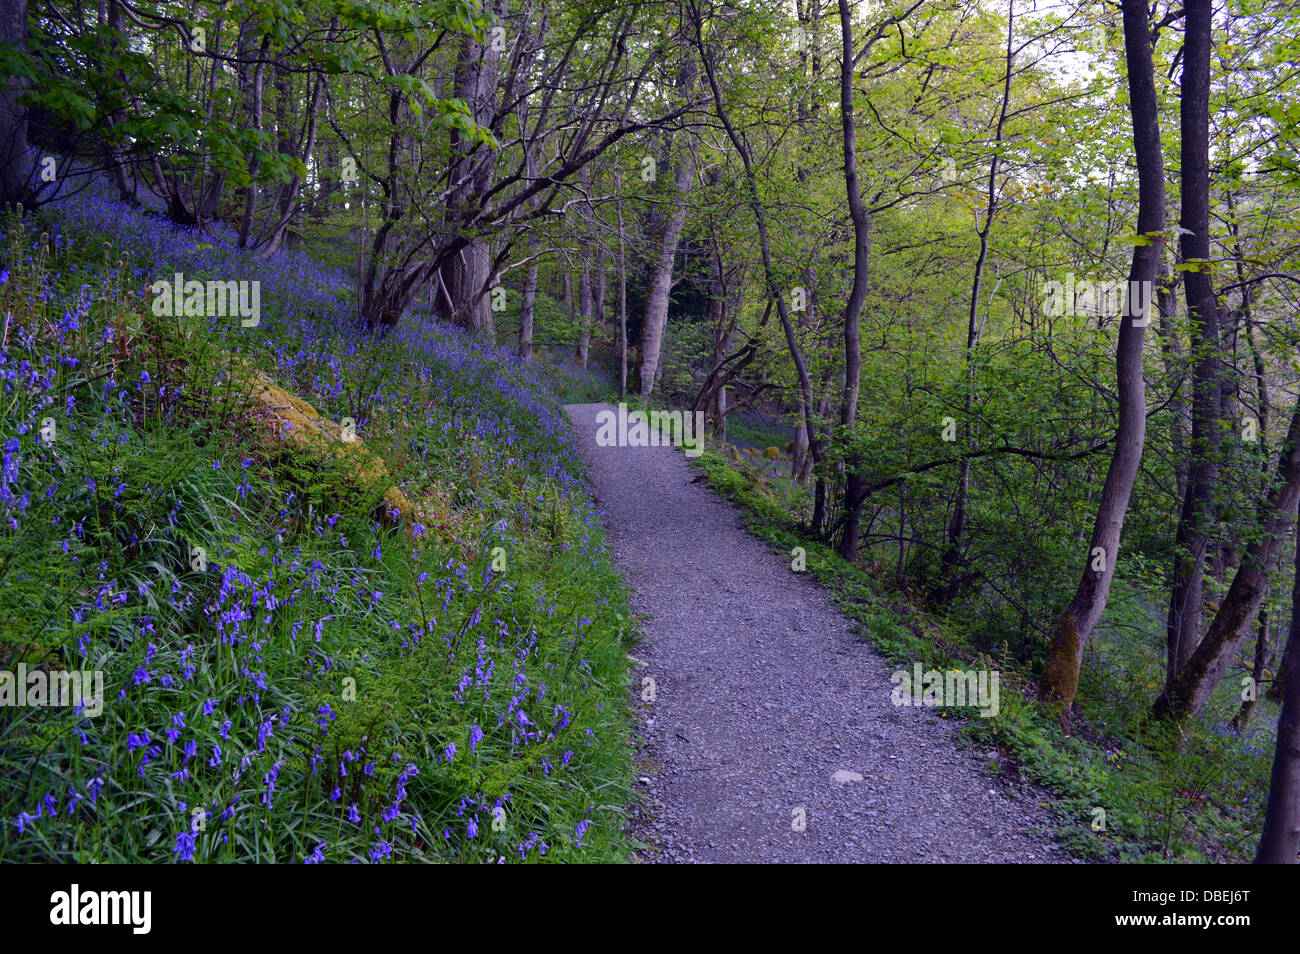 Bluebells & Trees in Strid Wood part of the Dales Way Long Distance Footpath Wharfedale Yorkshire Stock Photo